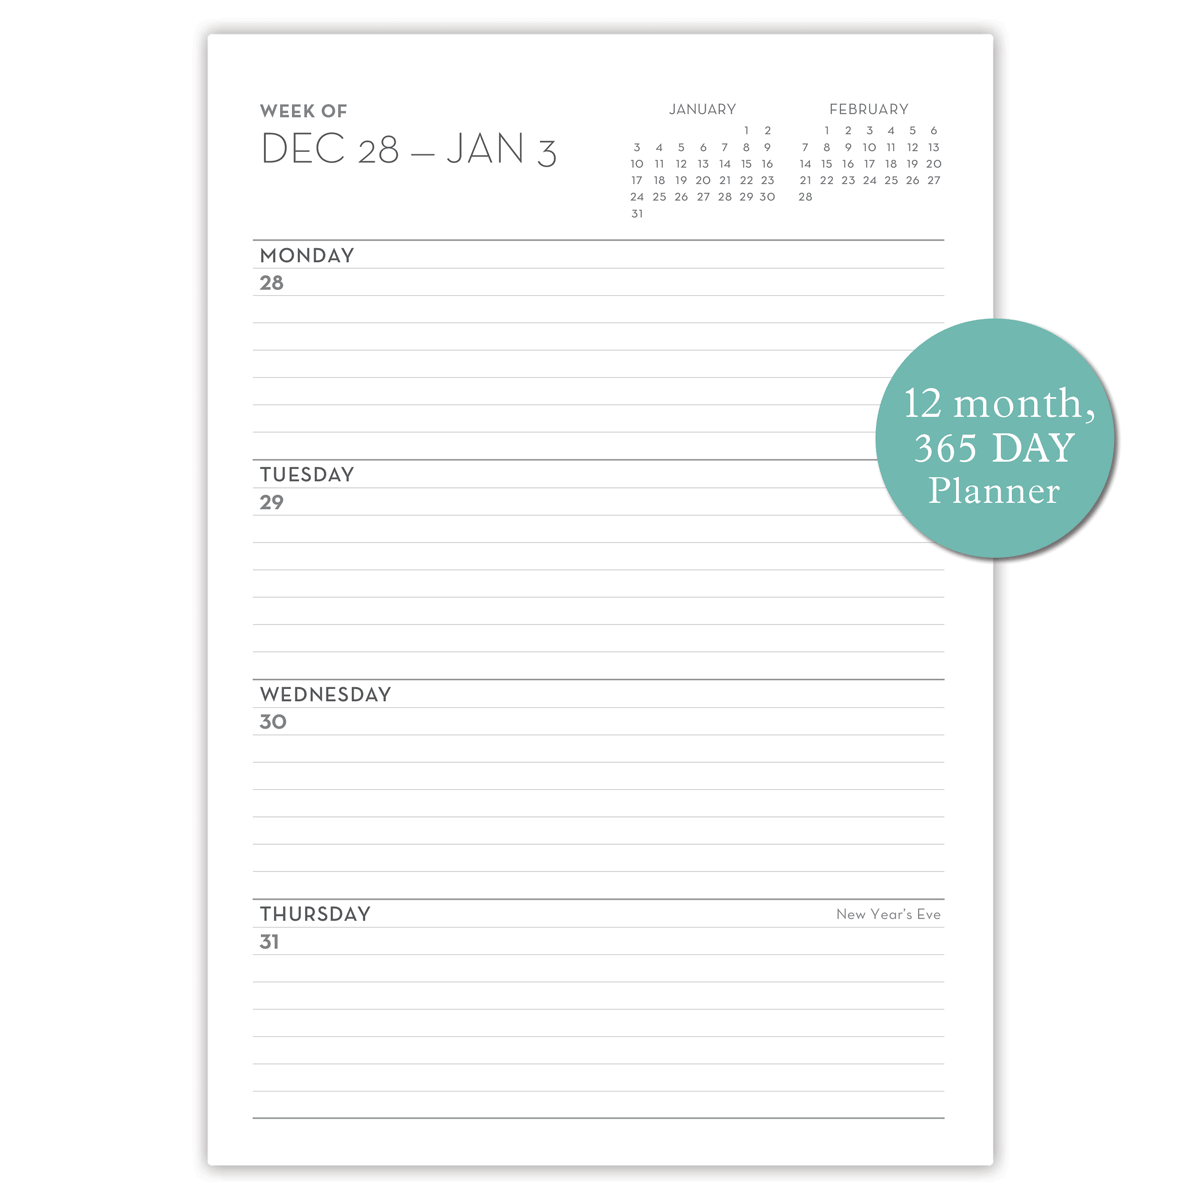 Freshly Squeezed (Planner)